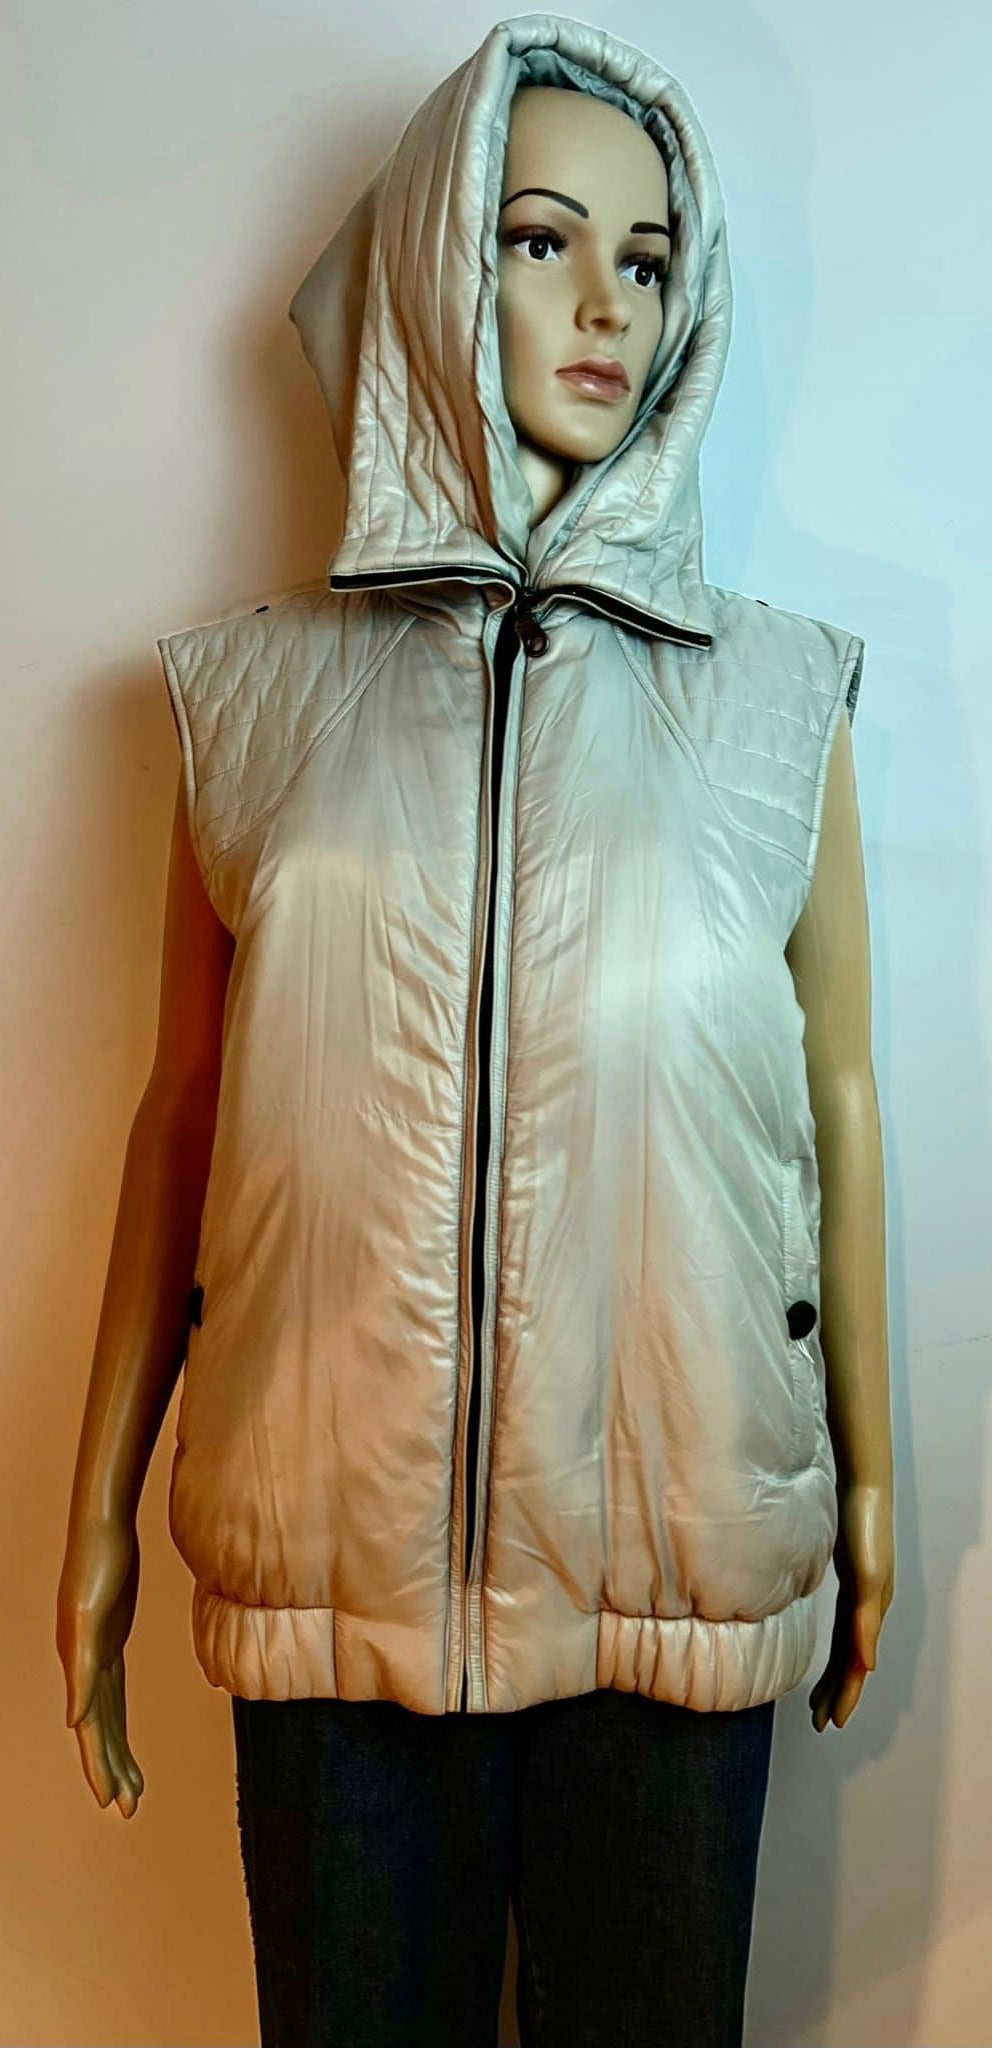 Chanel Zip Up Hooded Puffer Vest